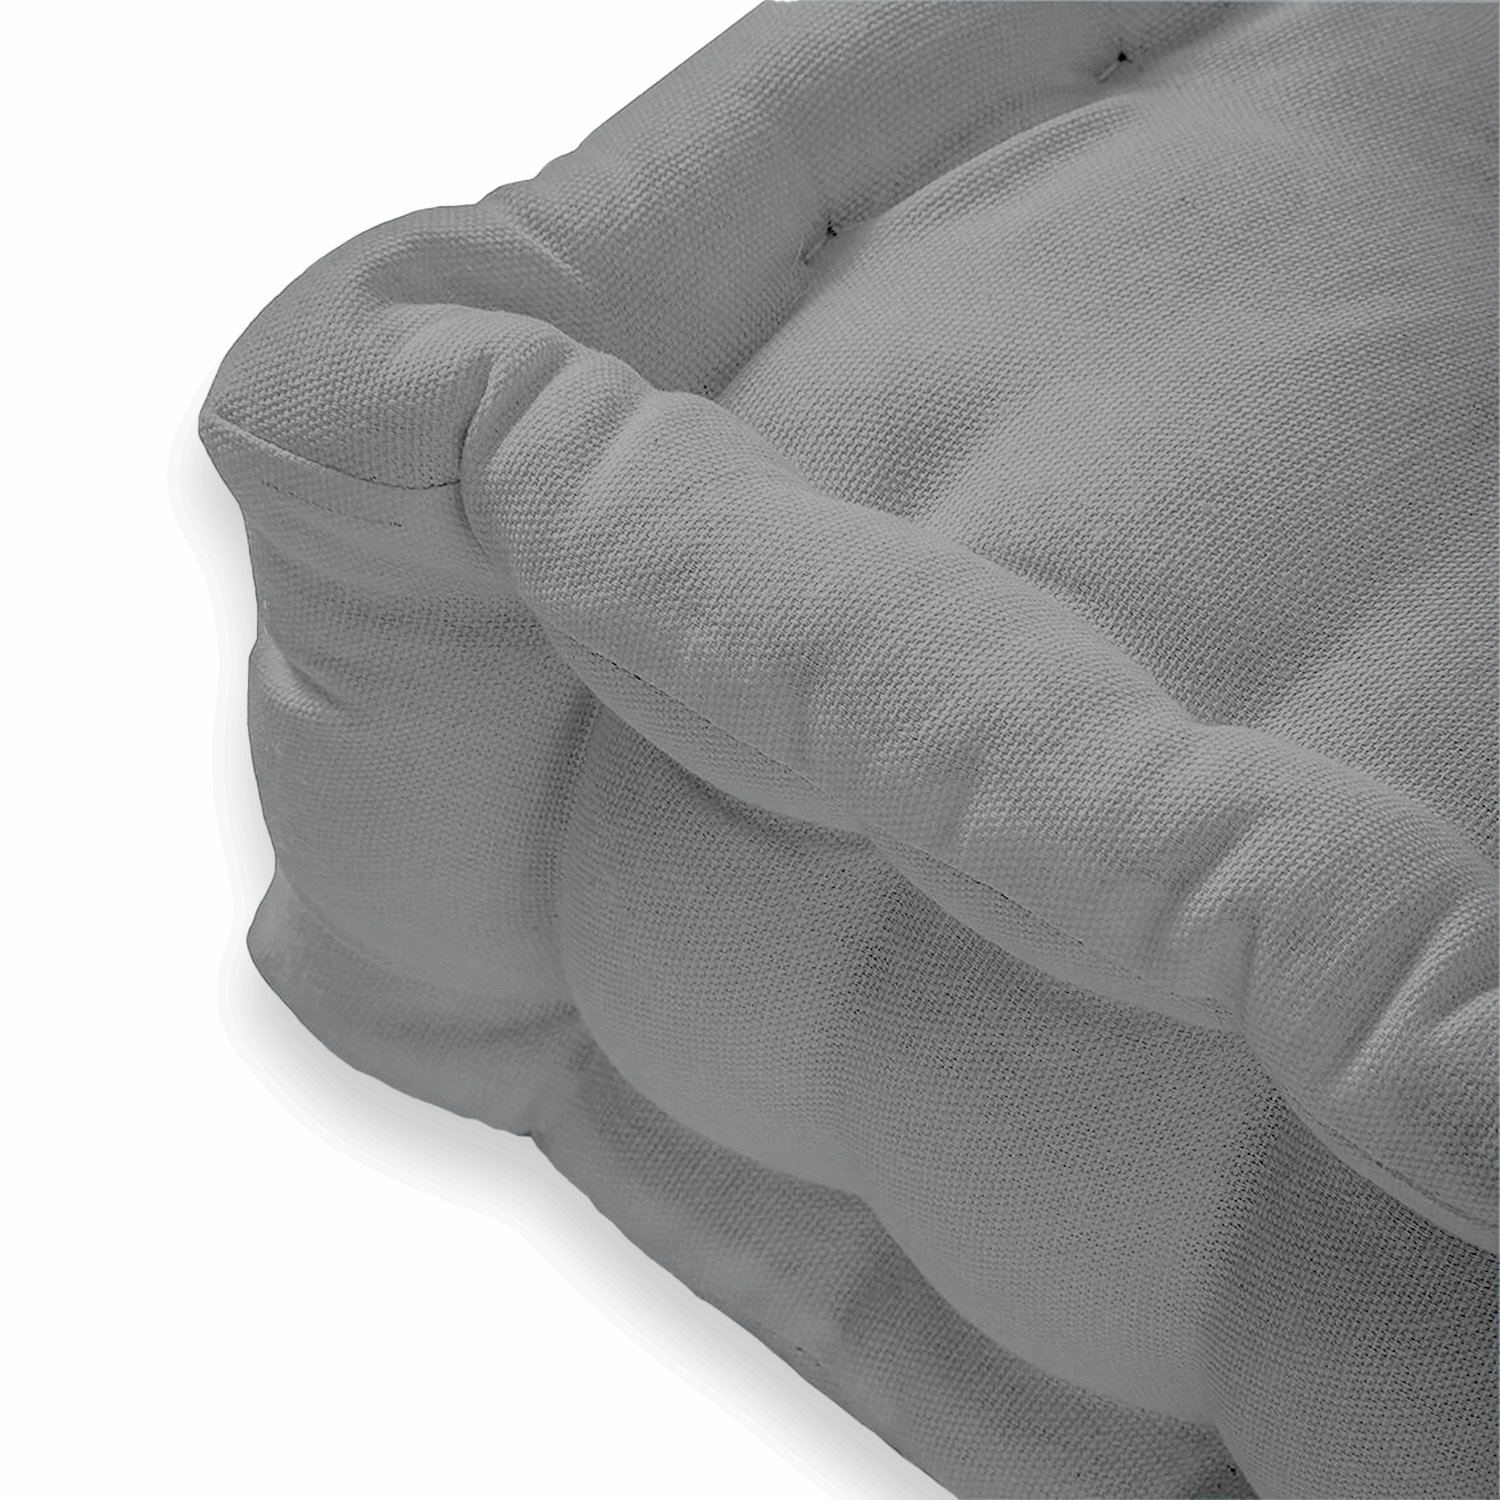 Booster Cushion Large Firm 50 cm Square Seat Pad with Supportive 10 cm Thick Lift Luxury Soft Touch Cotton Cushion For The Elderly, Post-Operative and Pregnancy